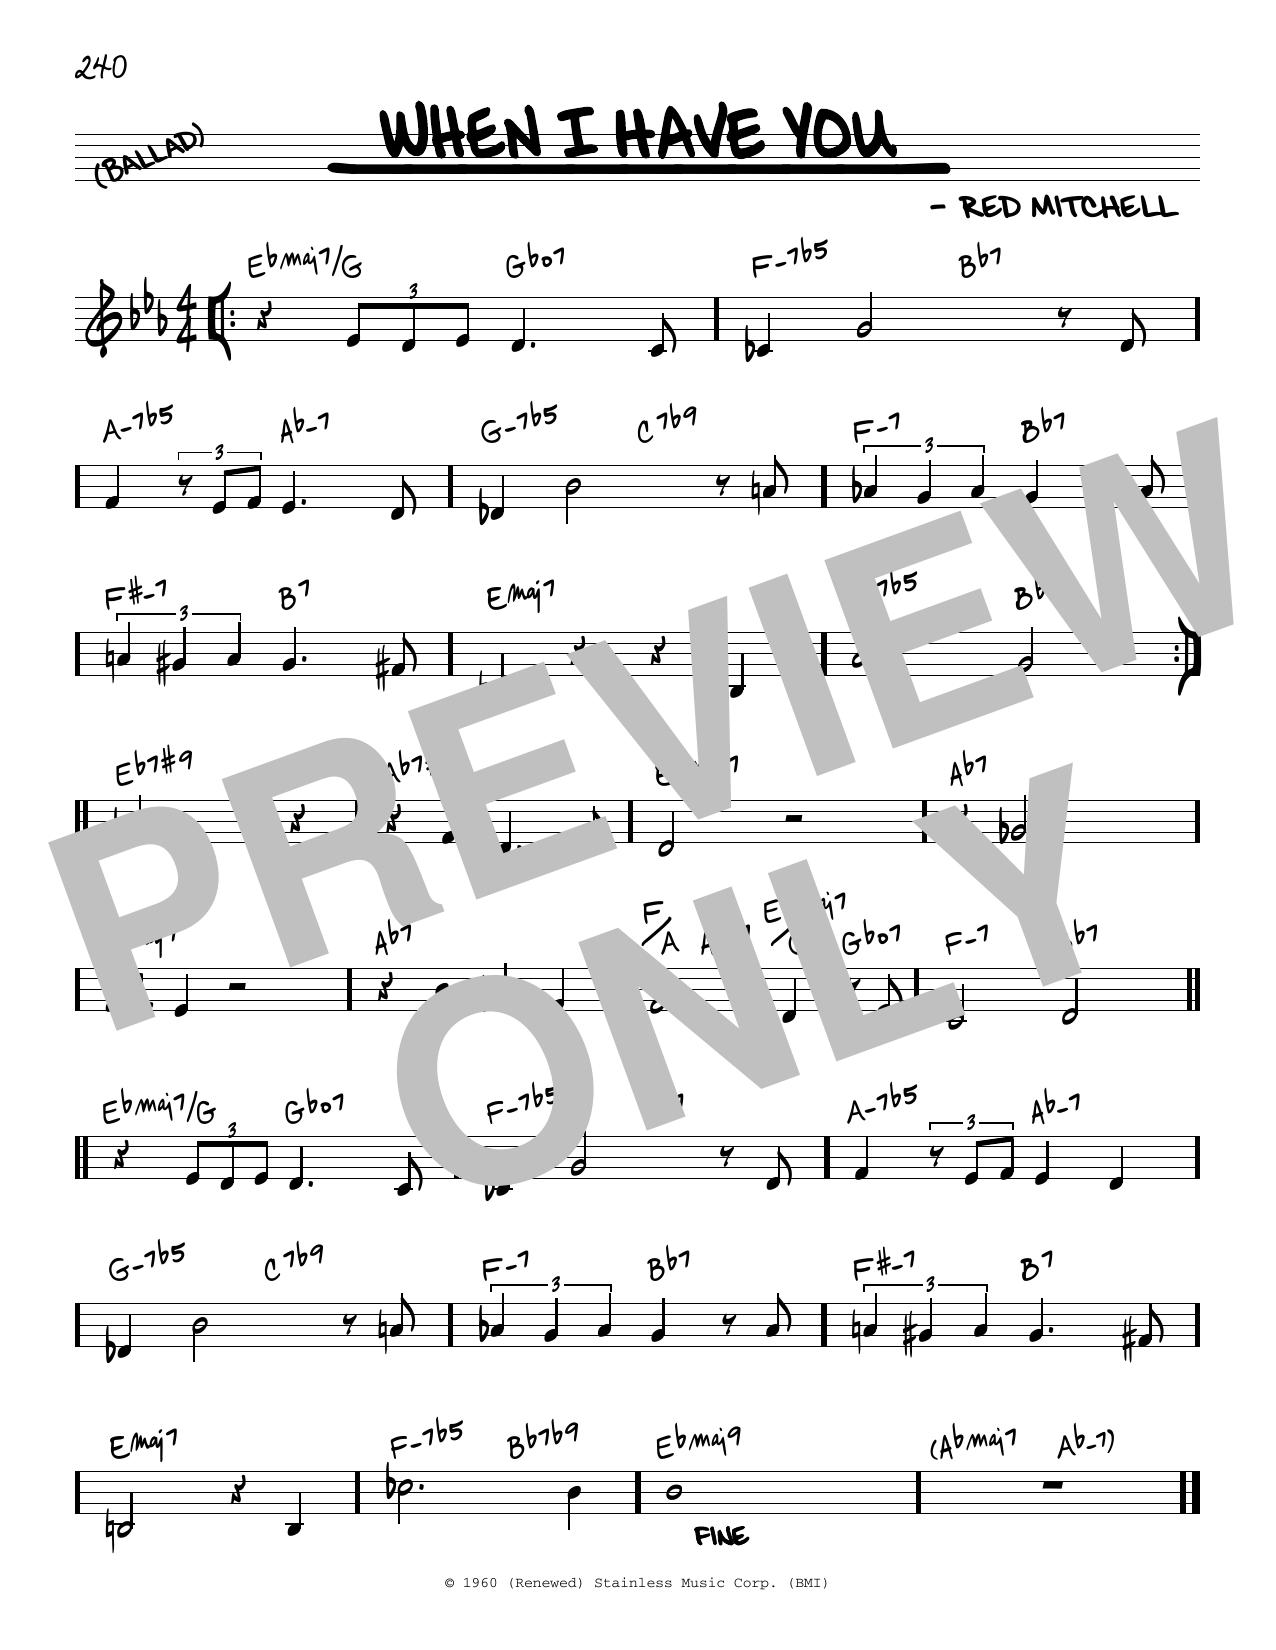 Download Red Mitchell When I Have You Sheet Music